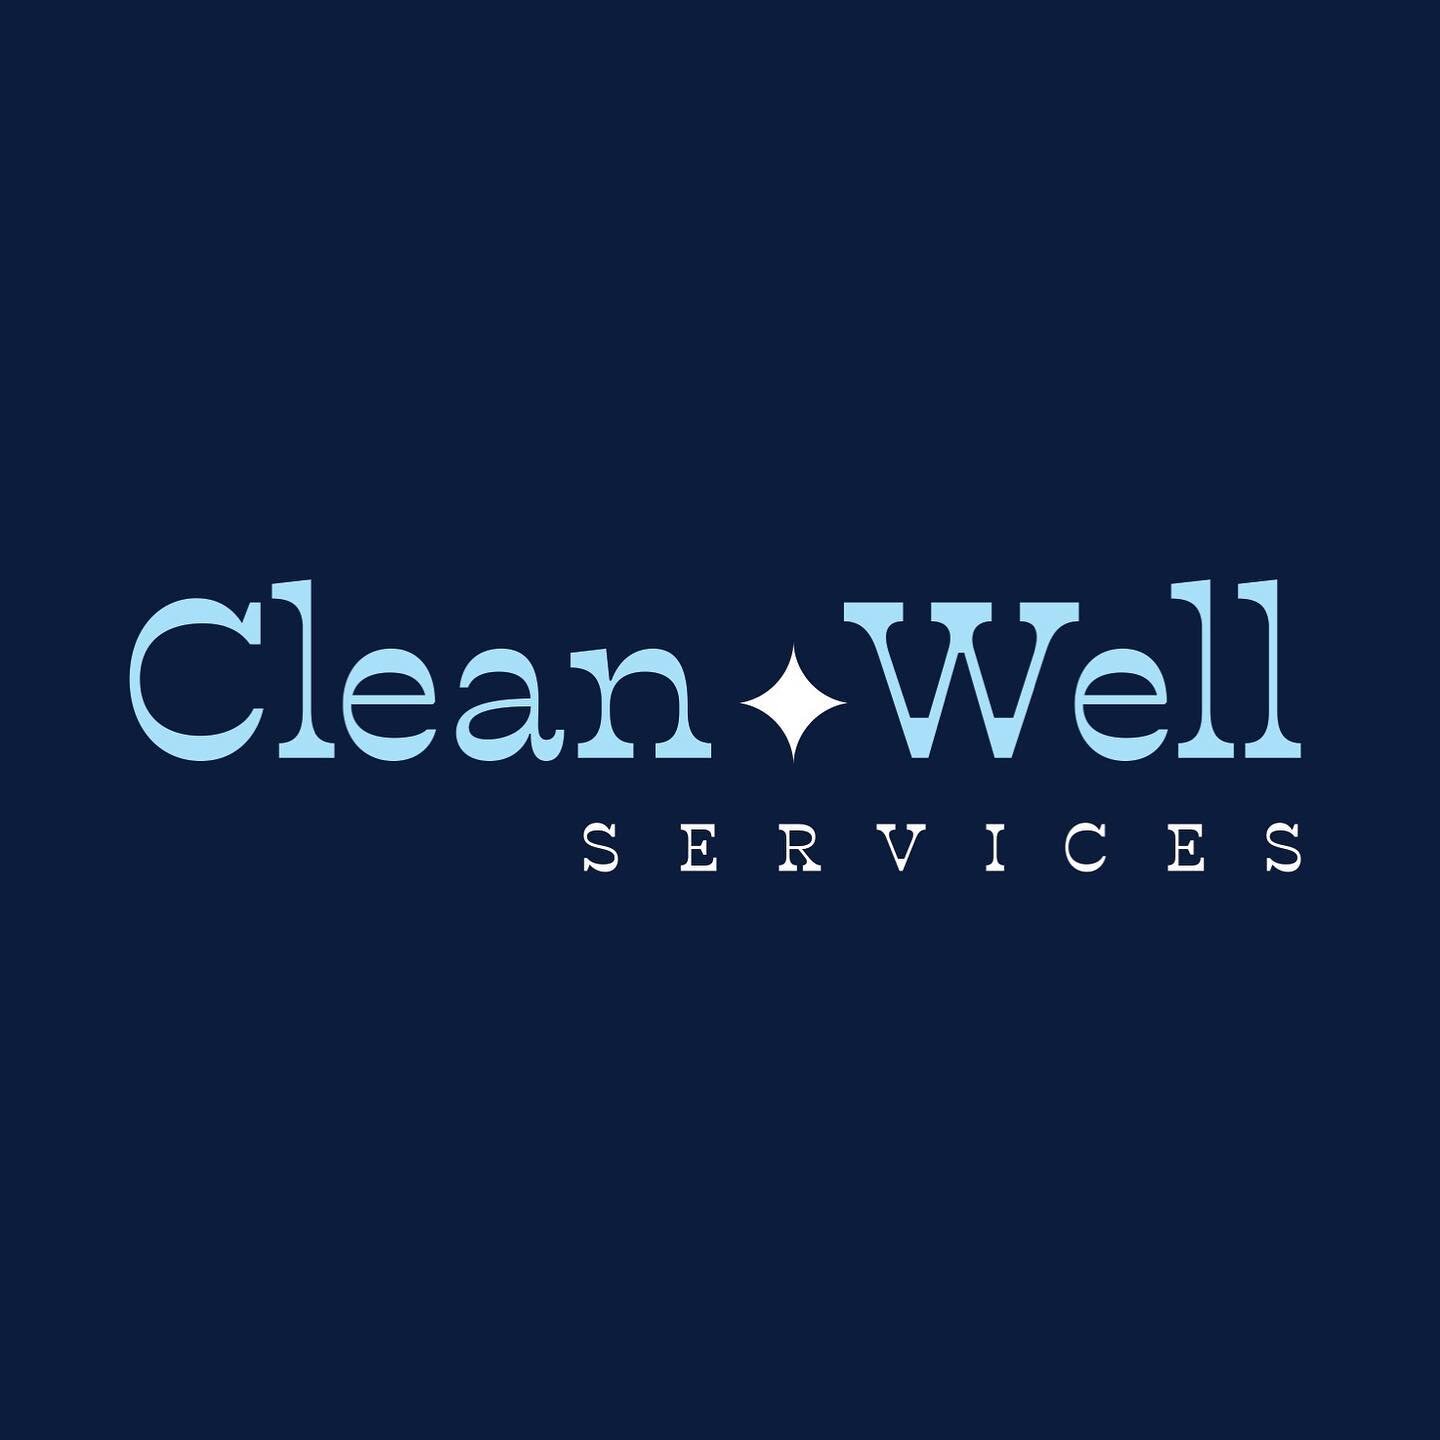 New logo for @cleanwellservices which just launched this week in response to the need for reliable santizing services. Ew, Covid. 
.
.
.
.
#atlantalogodesign #logodesign #branddesign #atlantabranding #brandlogo #atldesign #atldesigner #logodesigner